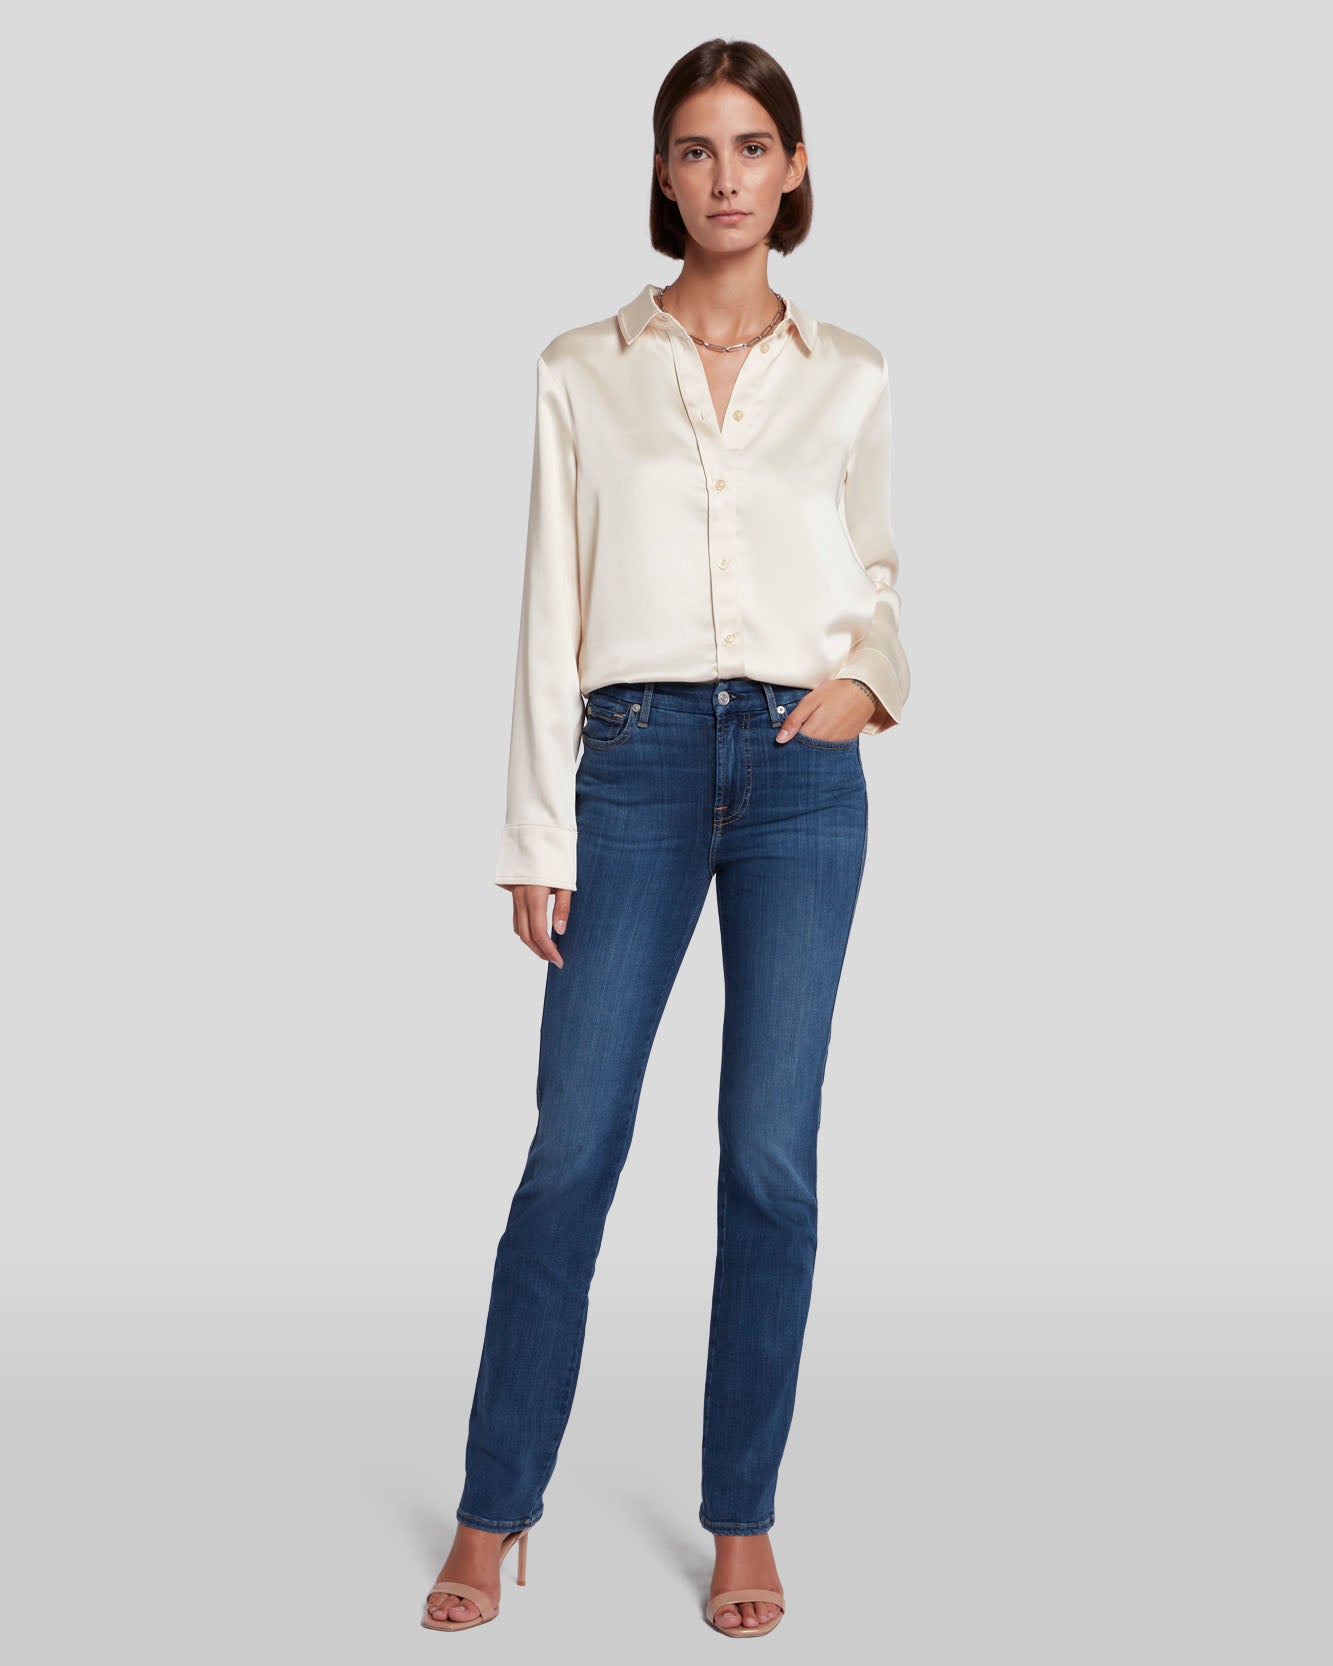 7 For All Mankind Slim Illusion Skinny Jeans Hot Pink, $178, Neiman Marcus